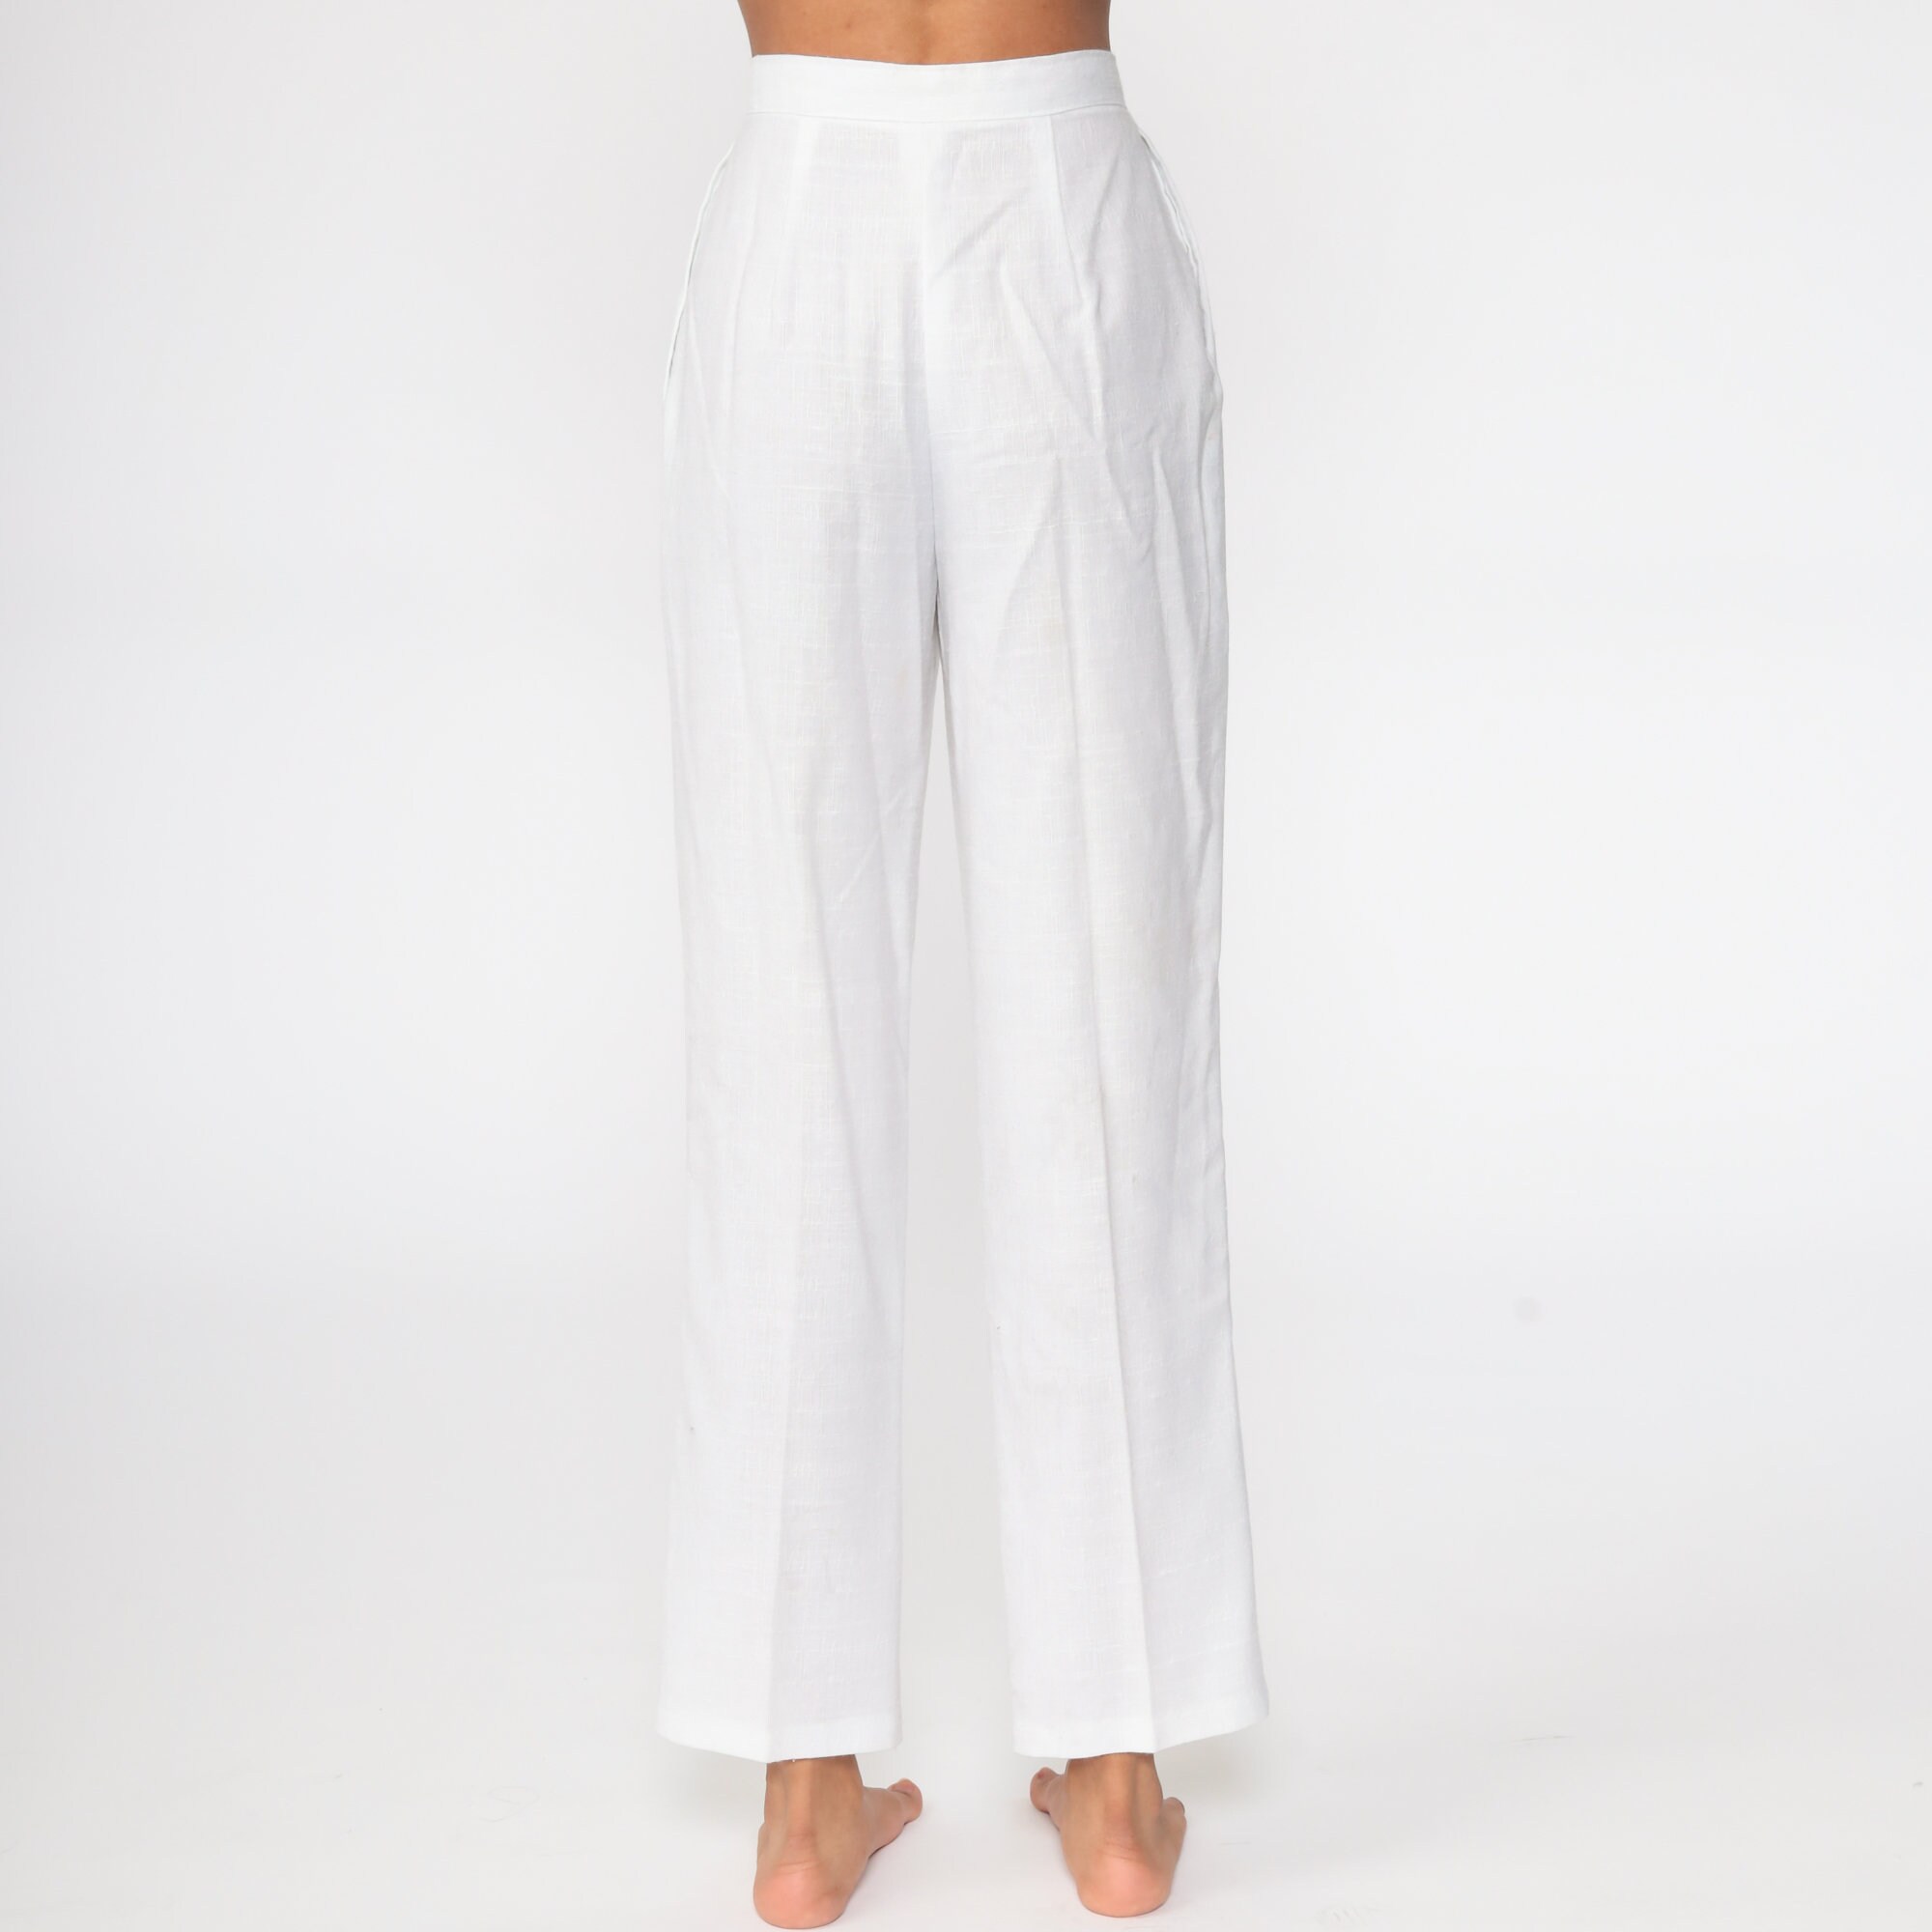 White Straight Leg Pants Pleated Trousers High Waisted Trousers 80s ...